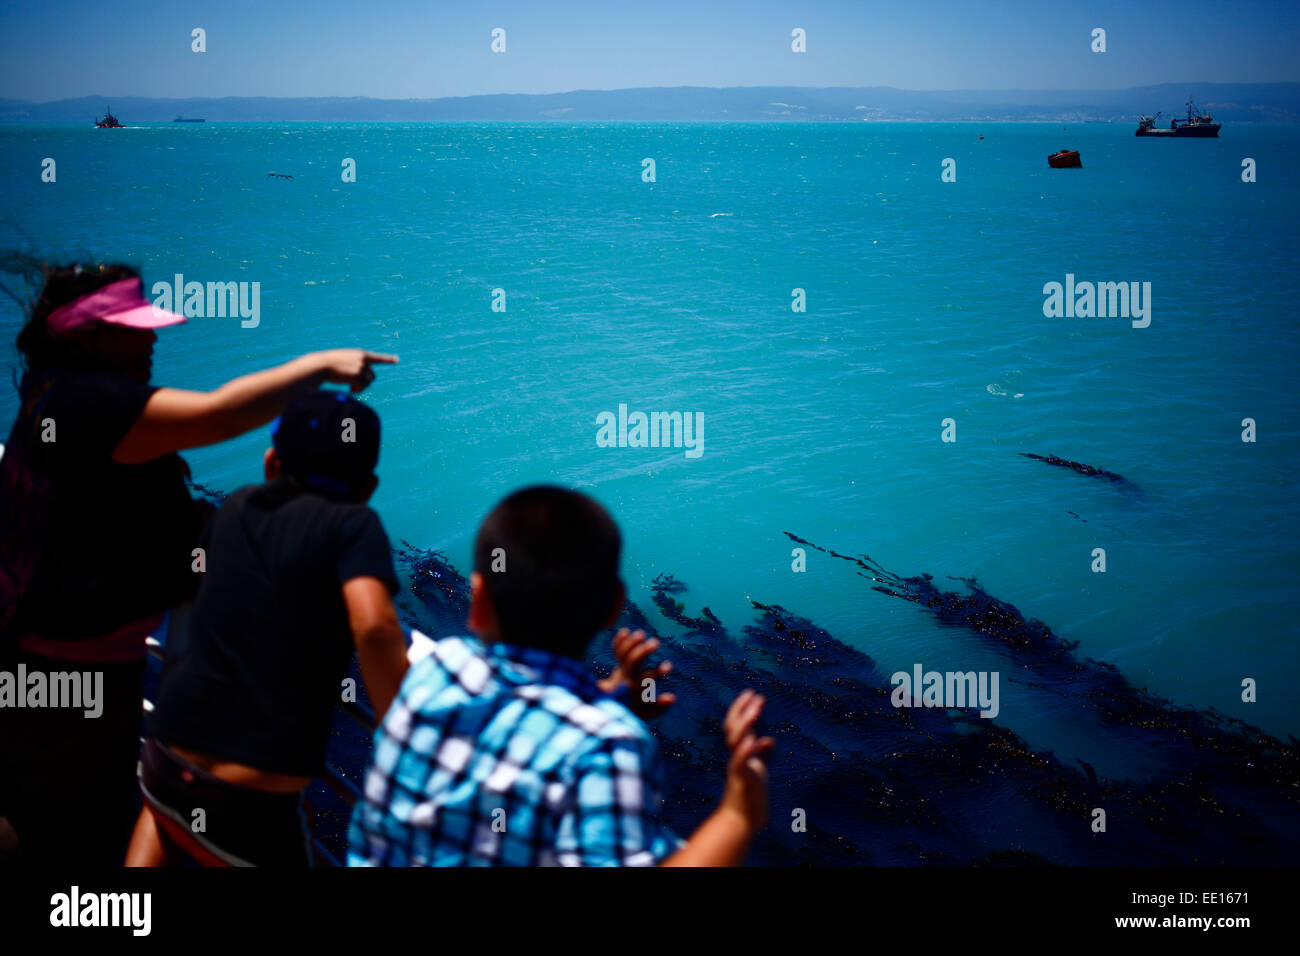 Talcahuano, Chile. 12th Jan, 2015. People watch the water of the Bay of Concepcion, in Talcahuano, in the Biobio region, Chile, on Jan. 12, 2015. According to local press, the waters of the Bay of Concepcion have become turquoise due to low oxygenation of the liquid called 'coastal upwelling'. © Str/Xinhua/Alamy Live News Stock Photo